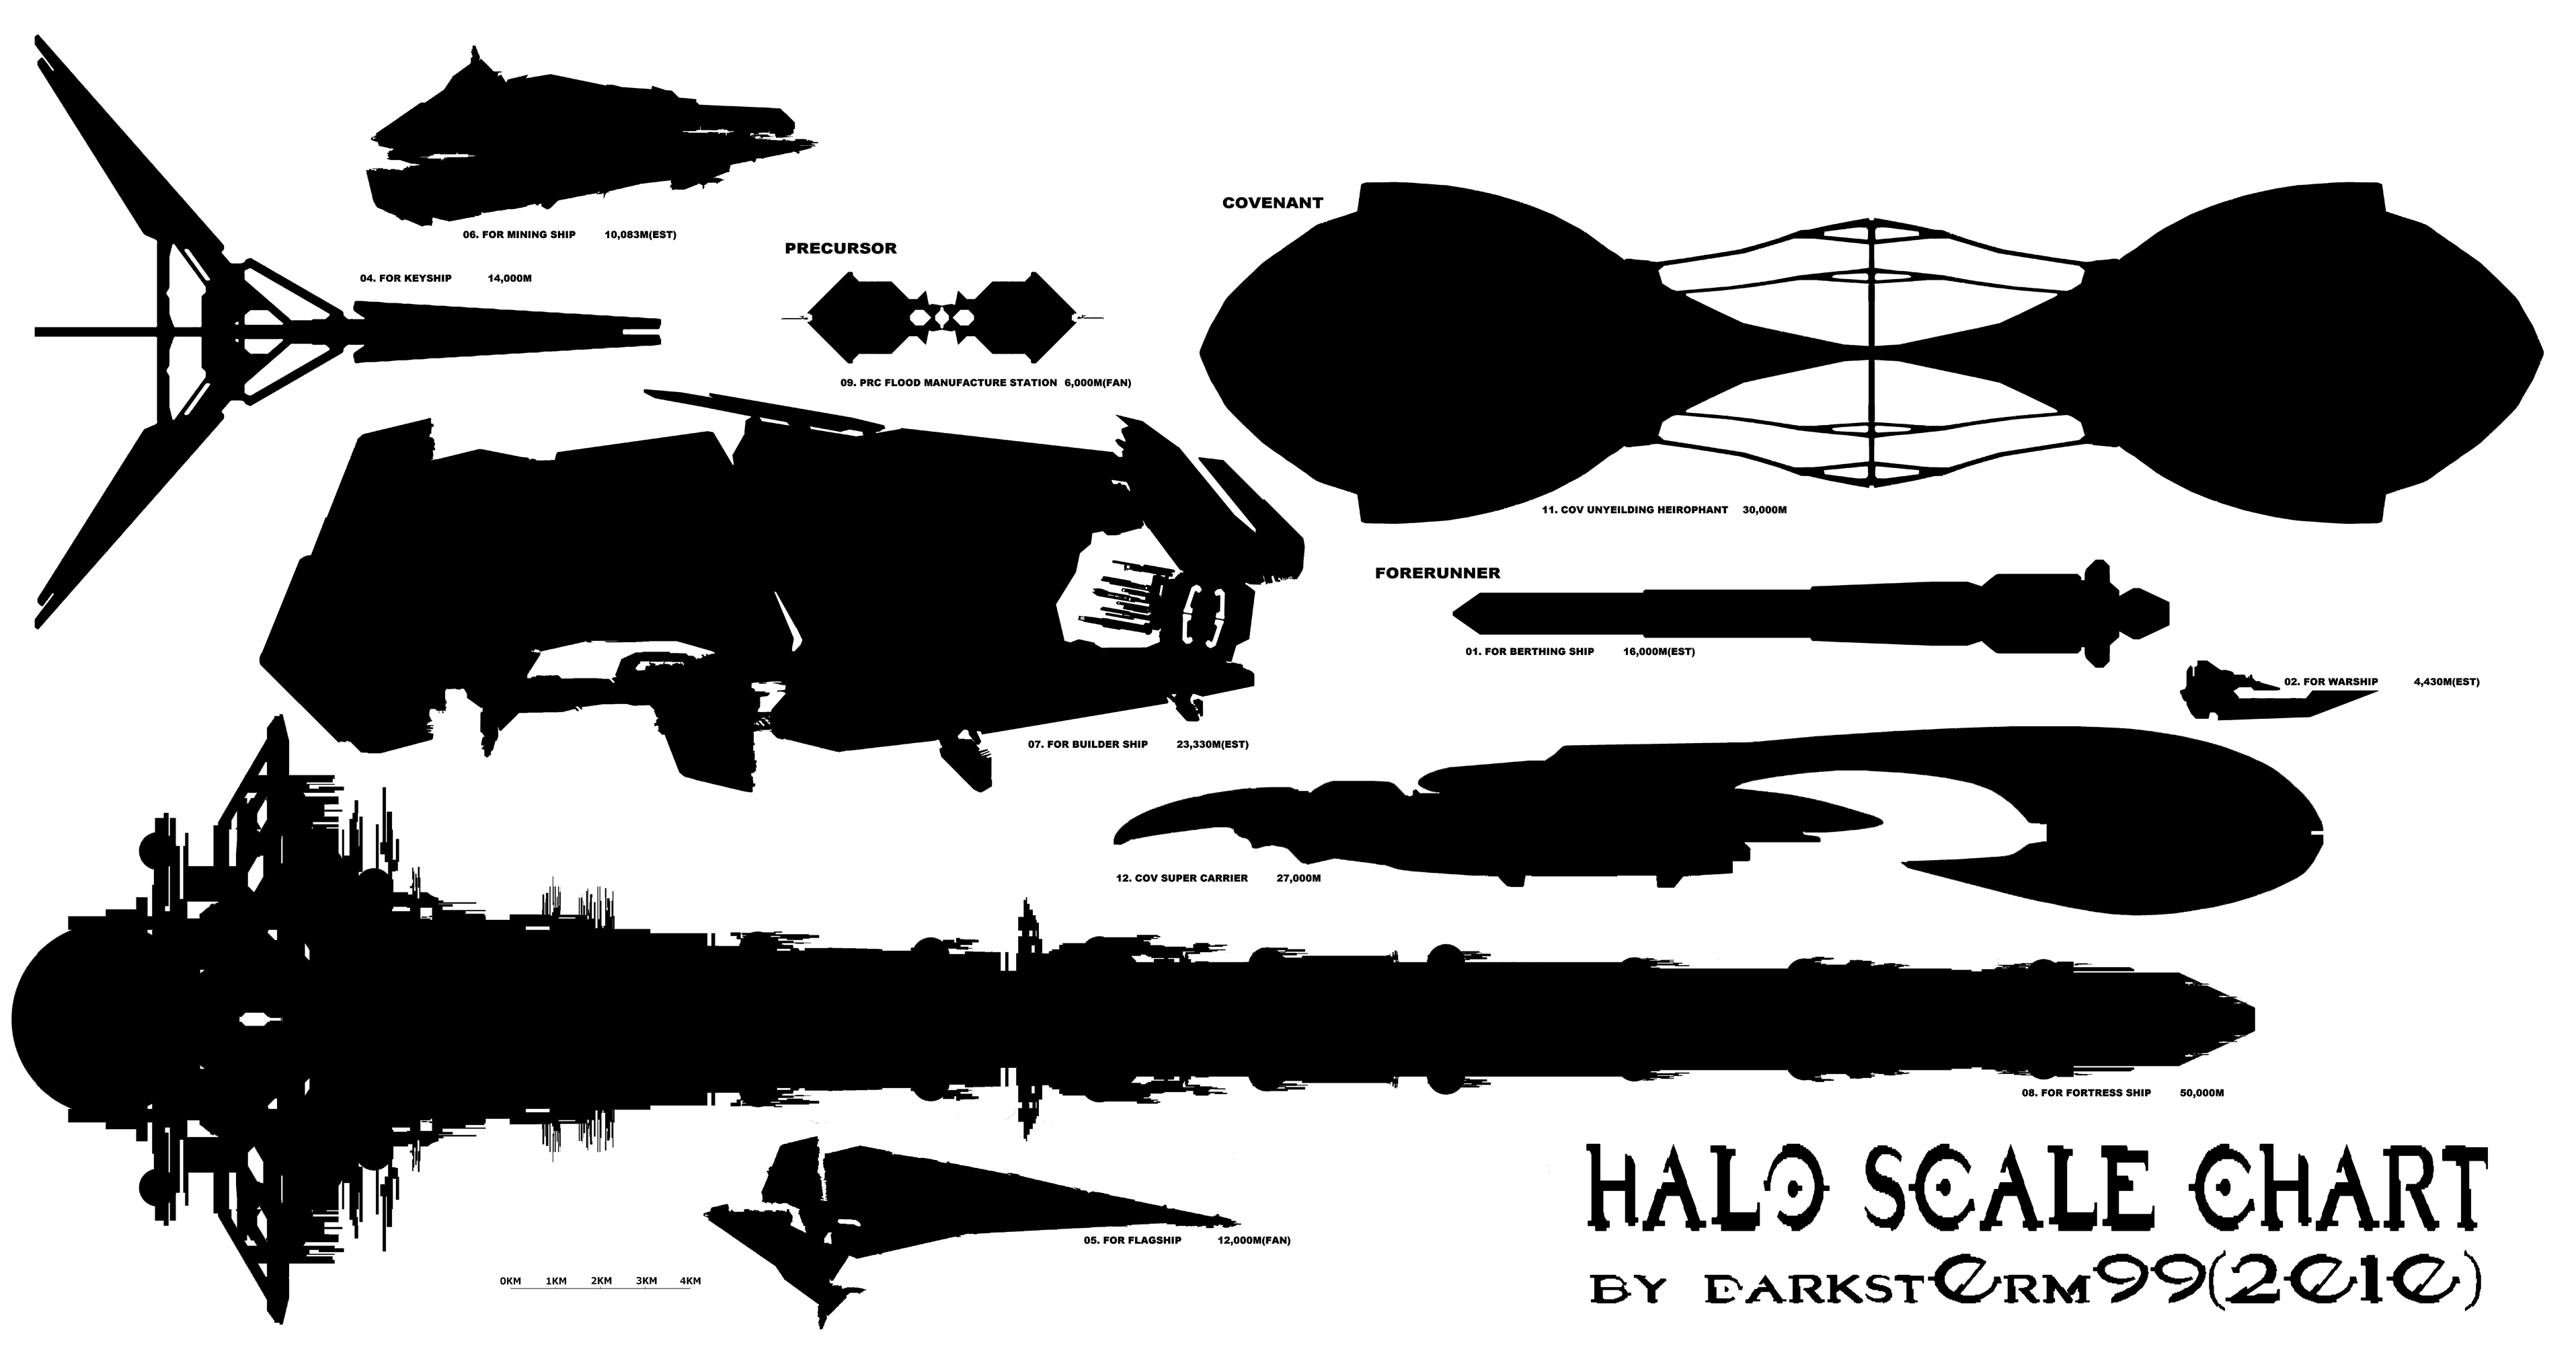 1304267641_halo_ship_scale_chart_large_by_d4rkst0rm99-d39ffjw-SM.jpg